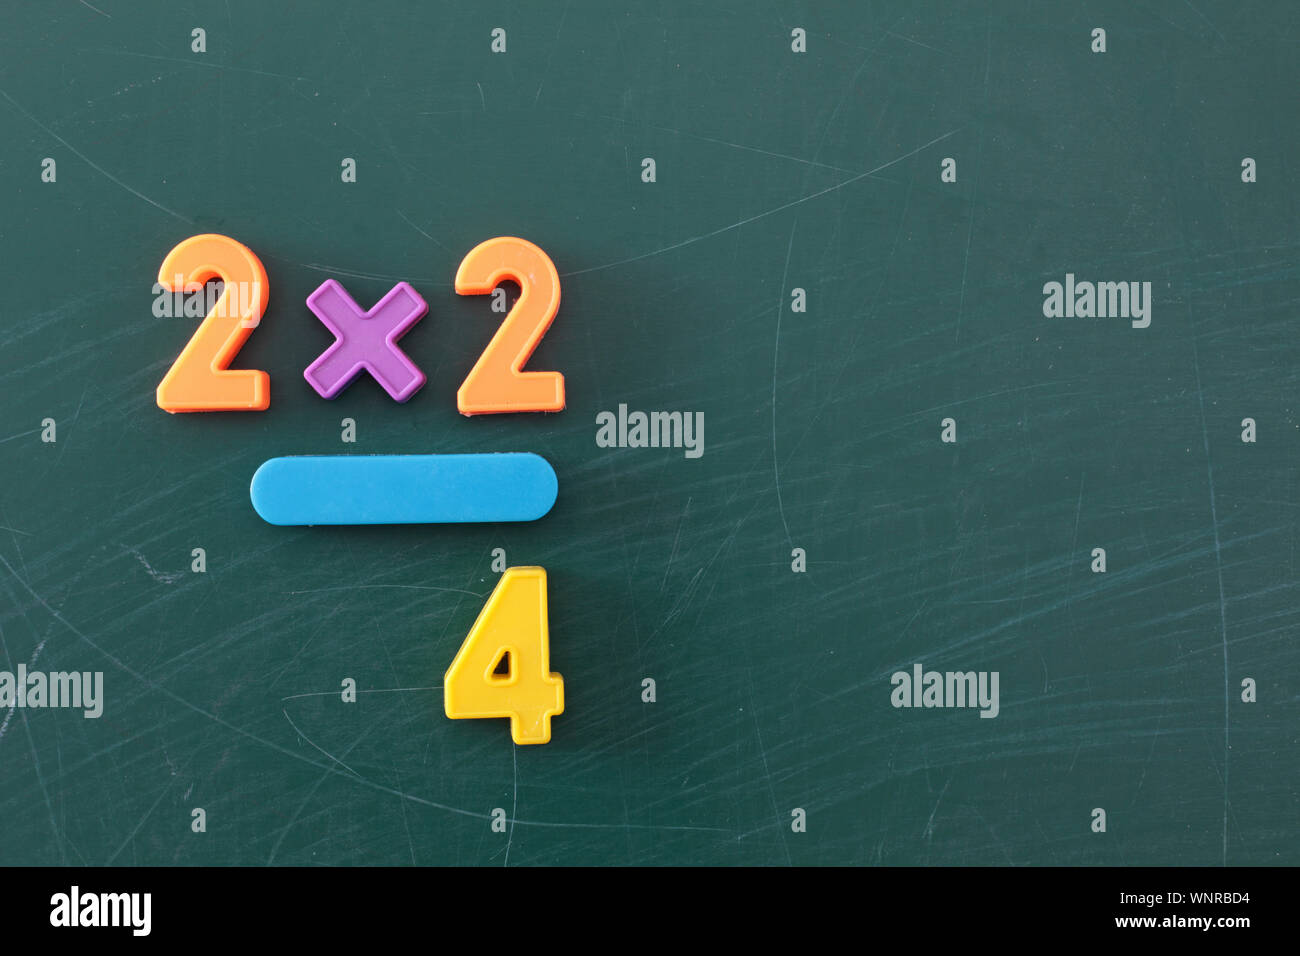 multiplication-and-division-dominos-2-3-4-5-6-7-8-9-and-10